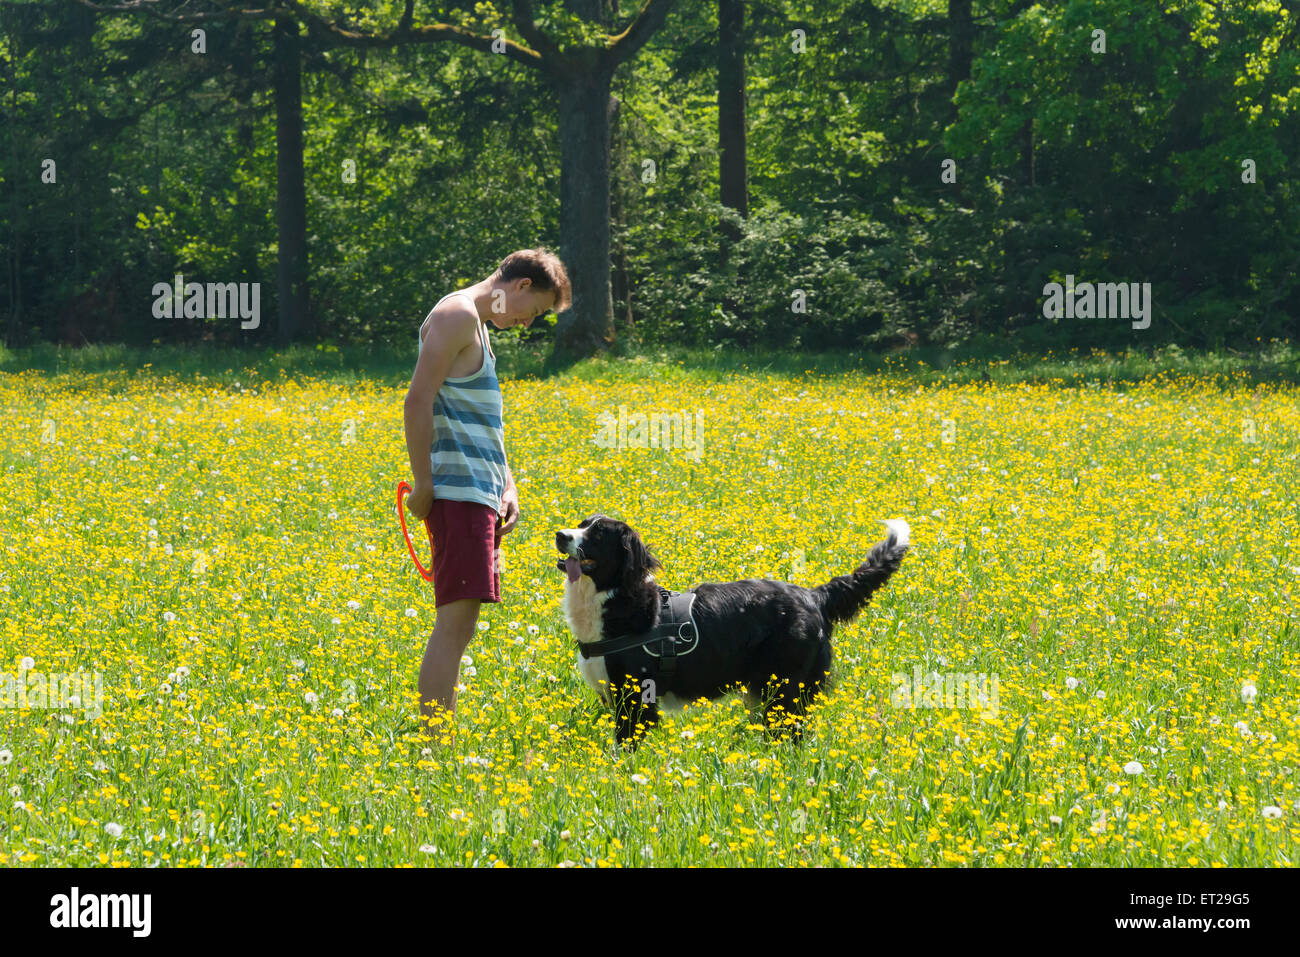 Young man playing frisbee with dog in meadow, Border Collie, Perlacher Forst, Munich, Bavaria, Germany Stock Photo